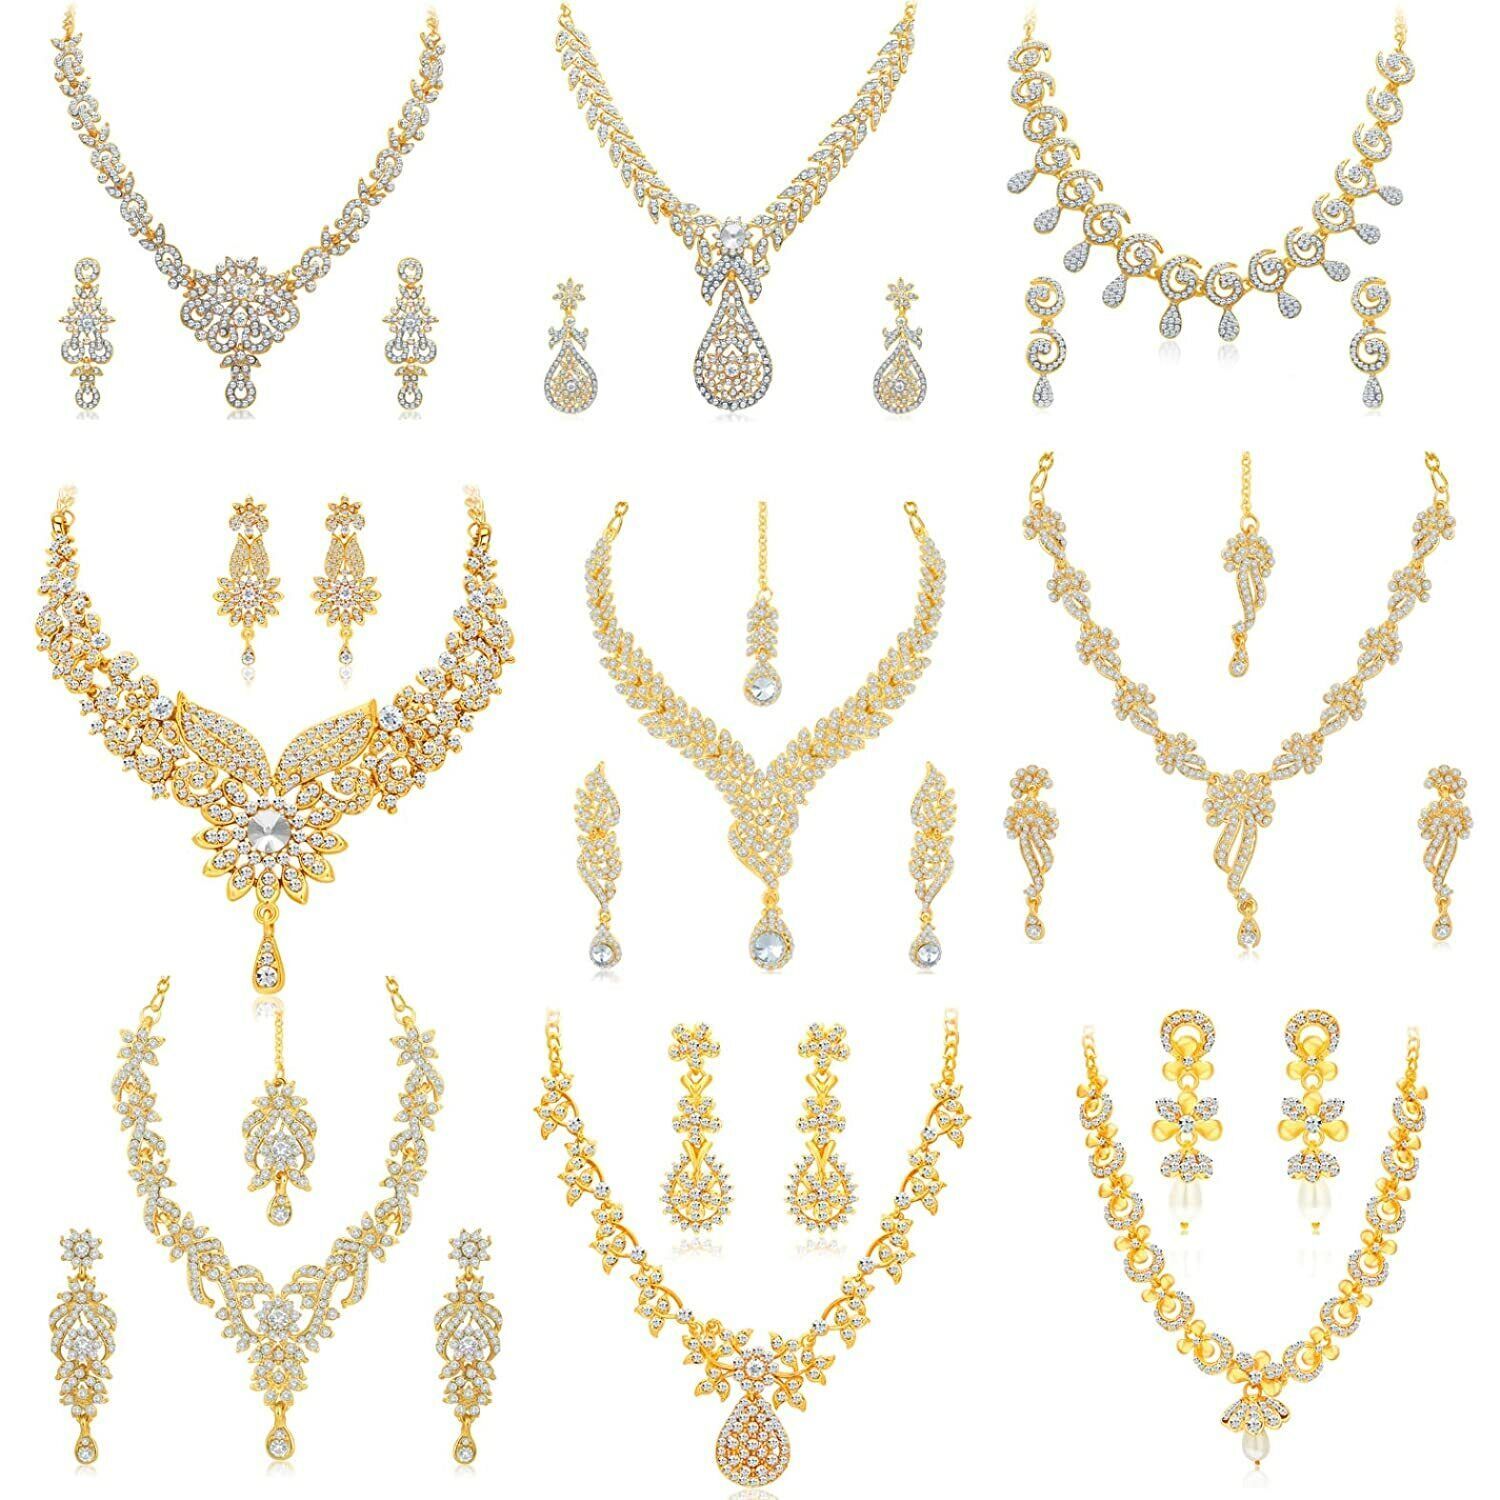 Primary image for 9 X Indian Bollywood Gold Plated Wedding Jewellery Austrian Diamond Necklace Set